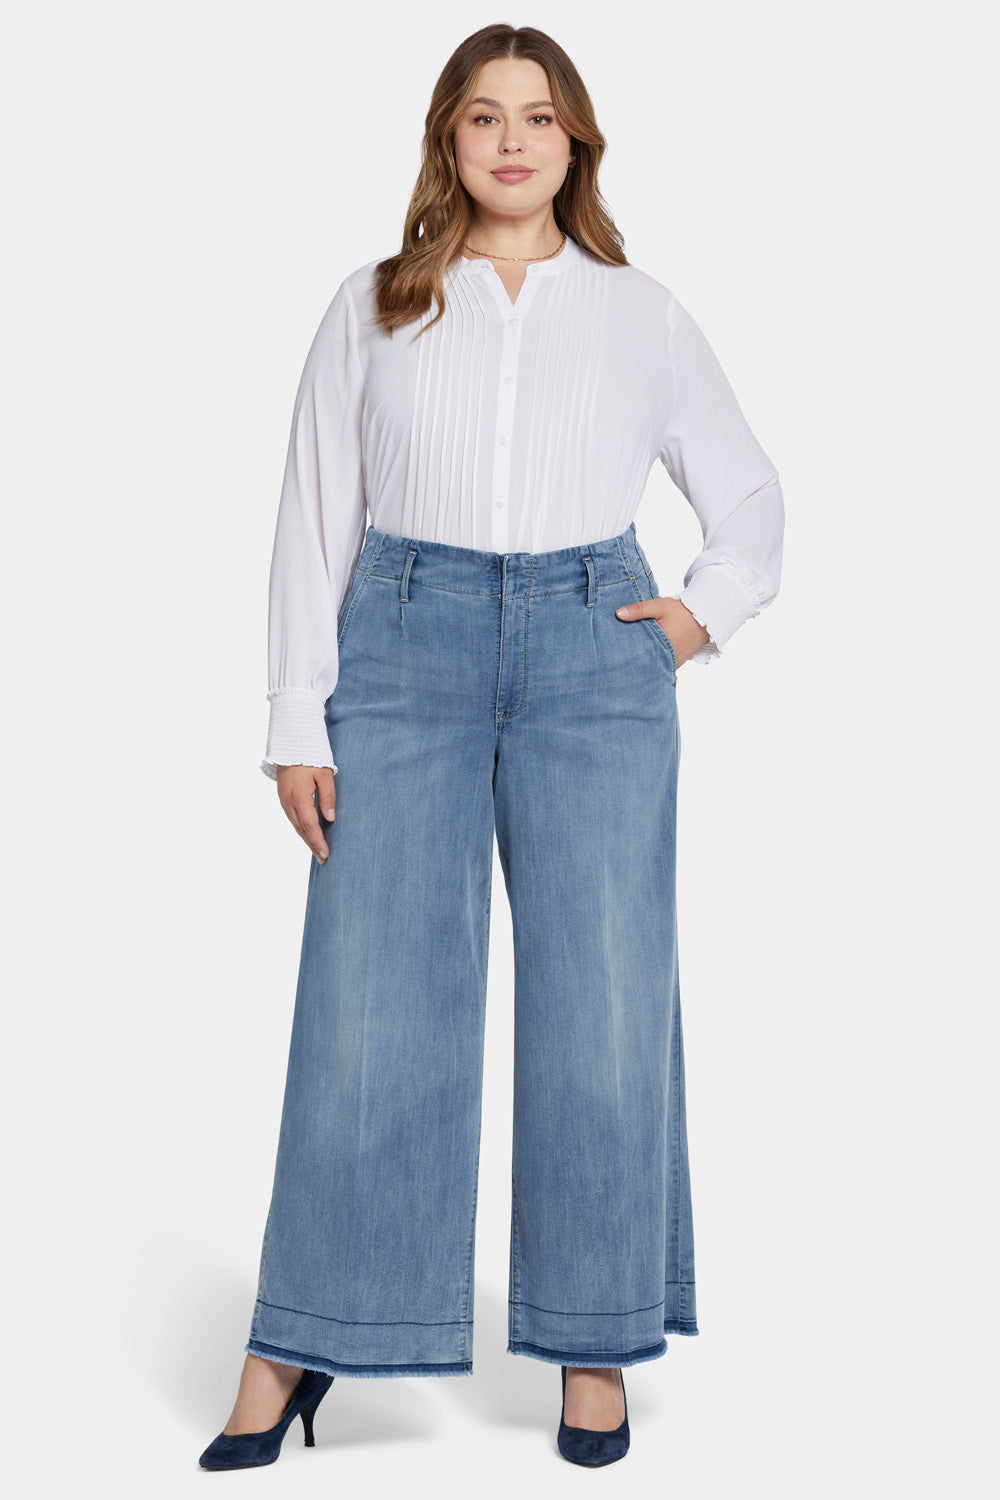 LEIJIJEANS Plus Size Baggy Jeans for Women Wide Leg Women Jeans Full Length  Mom High Waist Tall Loose Wide Leg Pants : : Clothing, Shoes 